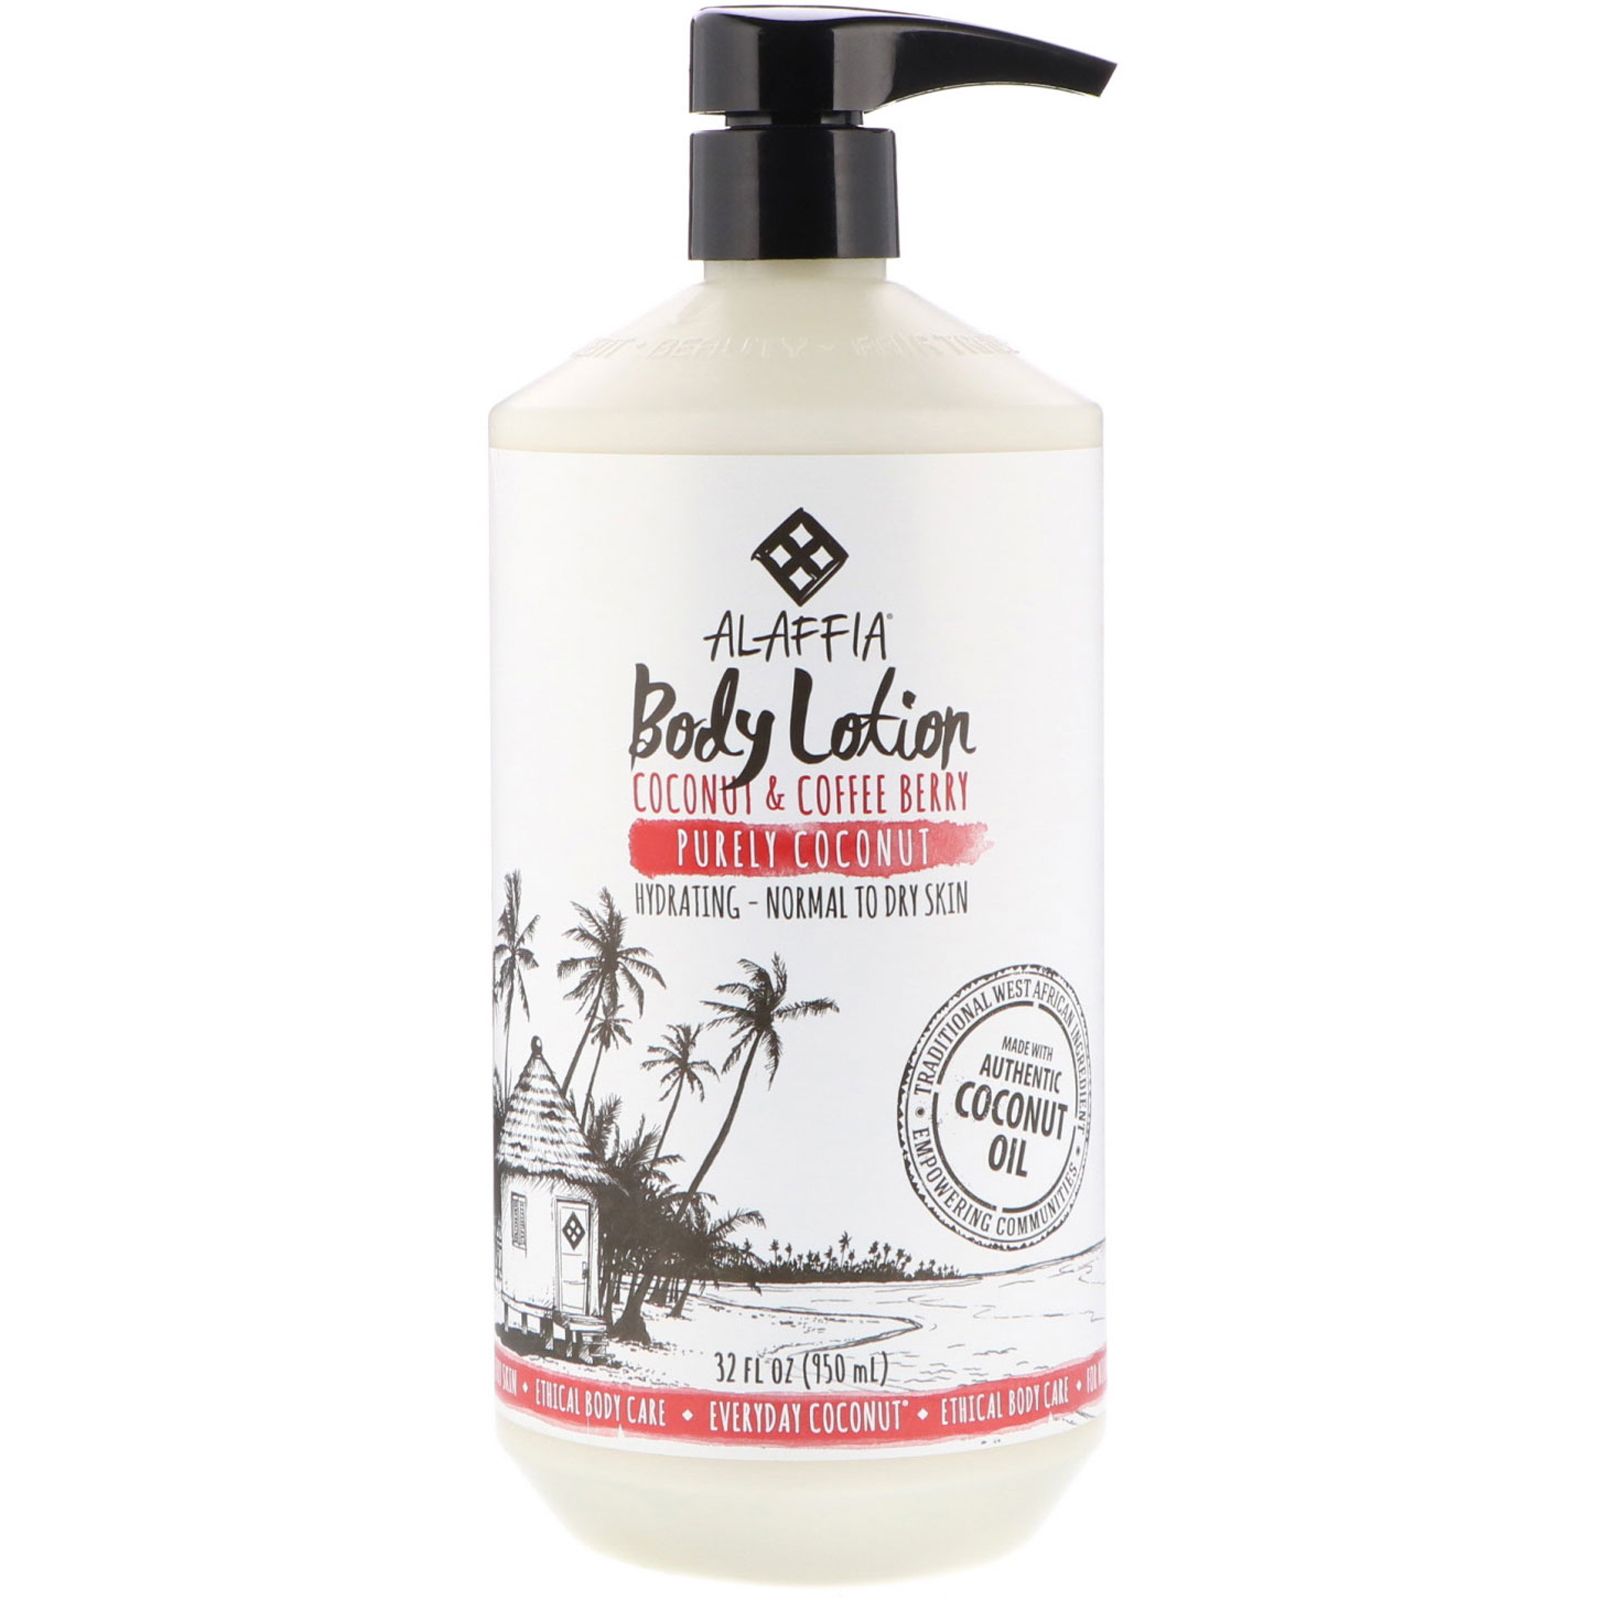 Everyday Coconut Body Lotion Hydrating Normal to Dry Skin Purely Coconut 32 fl oz (950 ml) everyday coconut night cream purely coconut 12 fl oz 354 ml